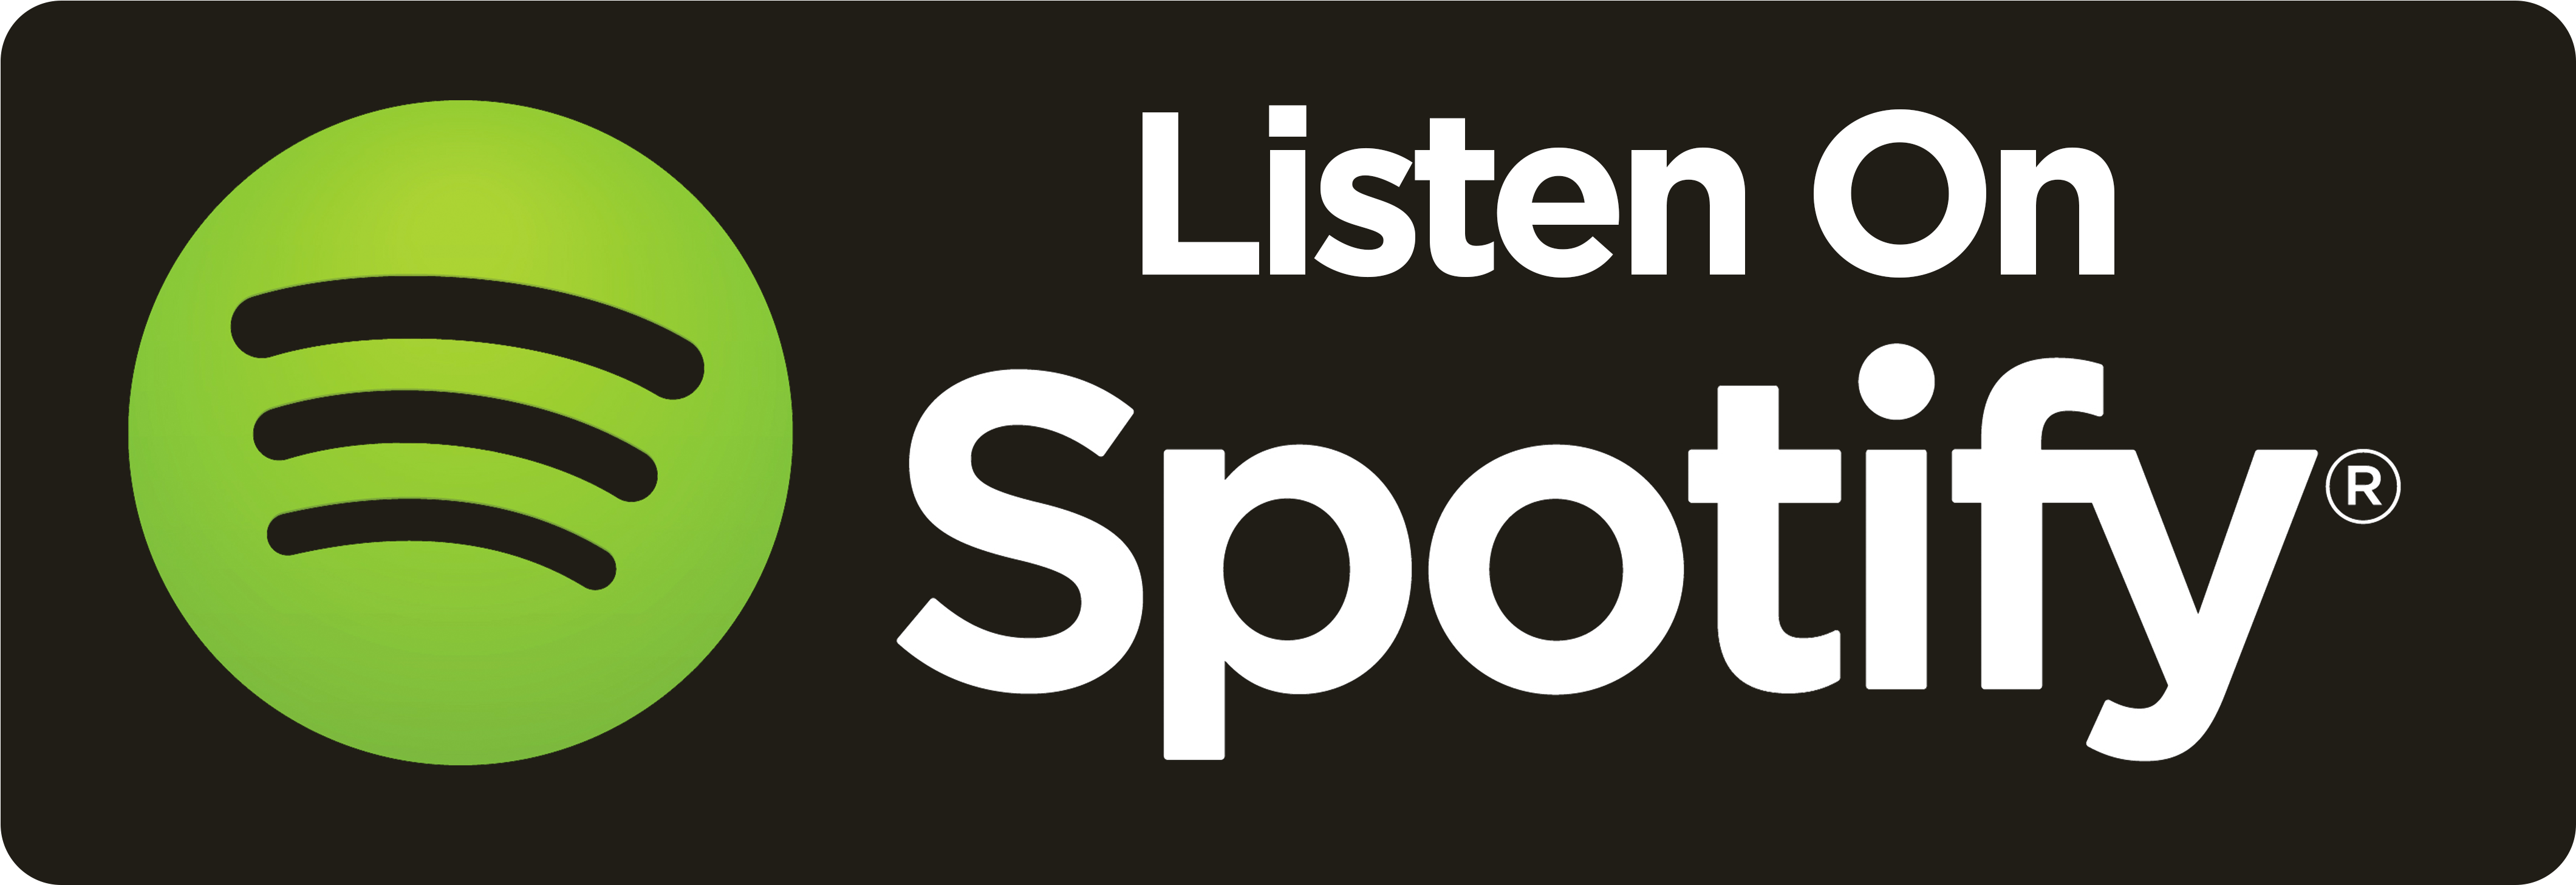 Download Spotify Logo - Now Streaming On Spotify PNG Image with No  Background 